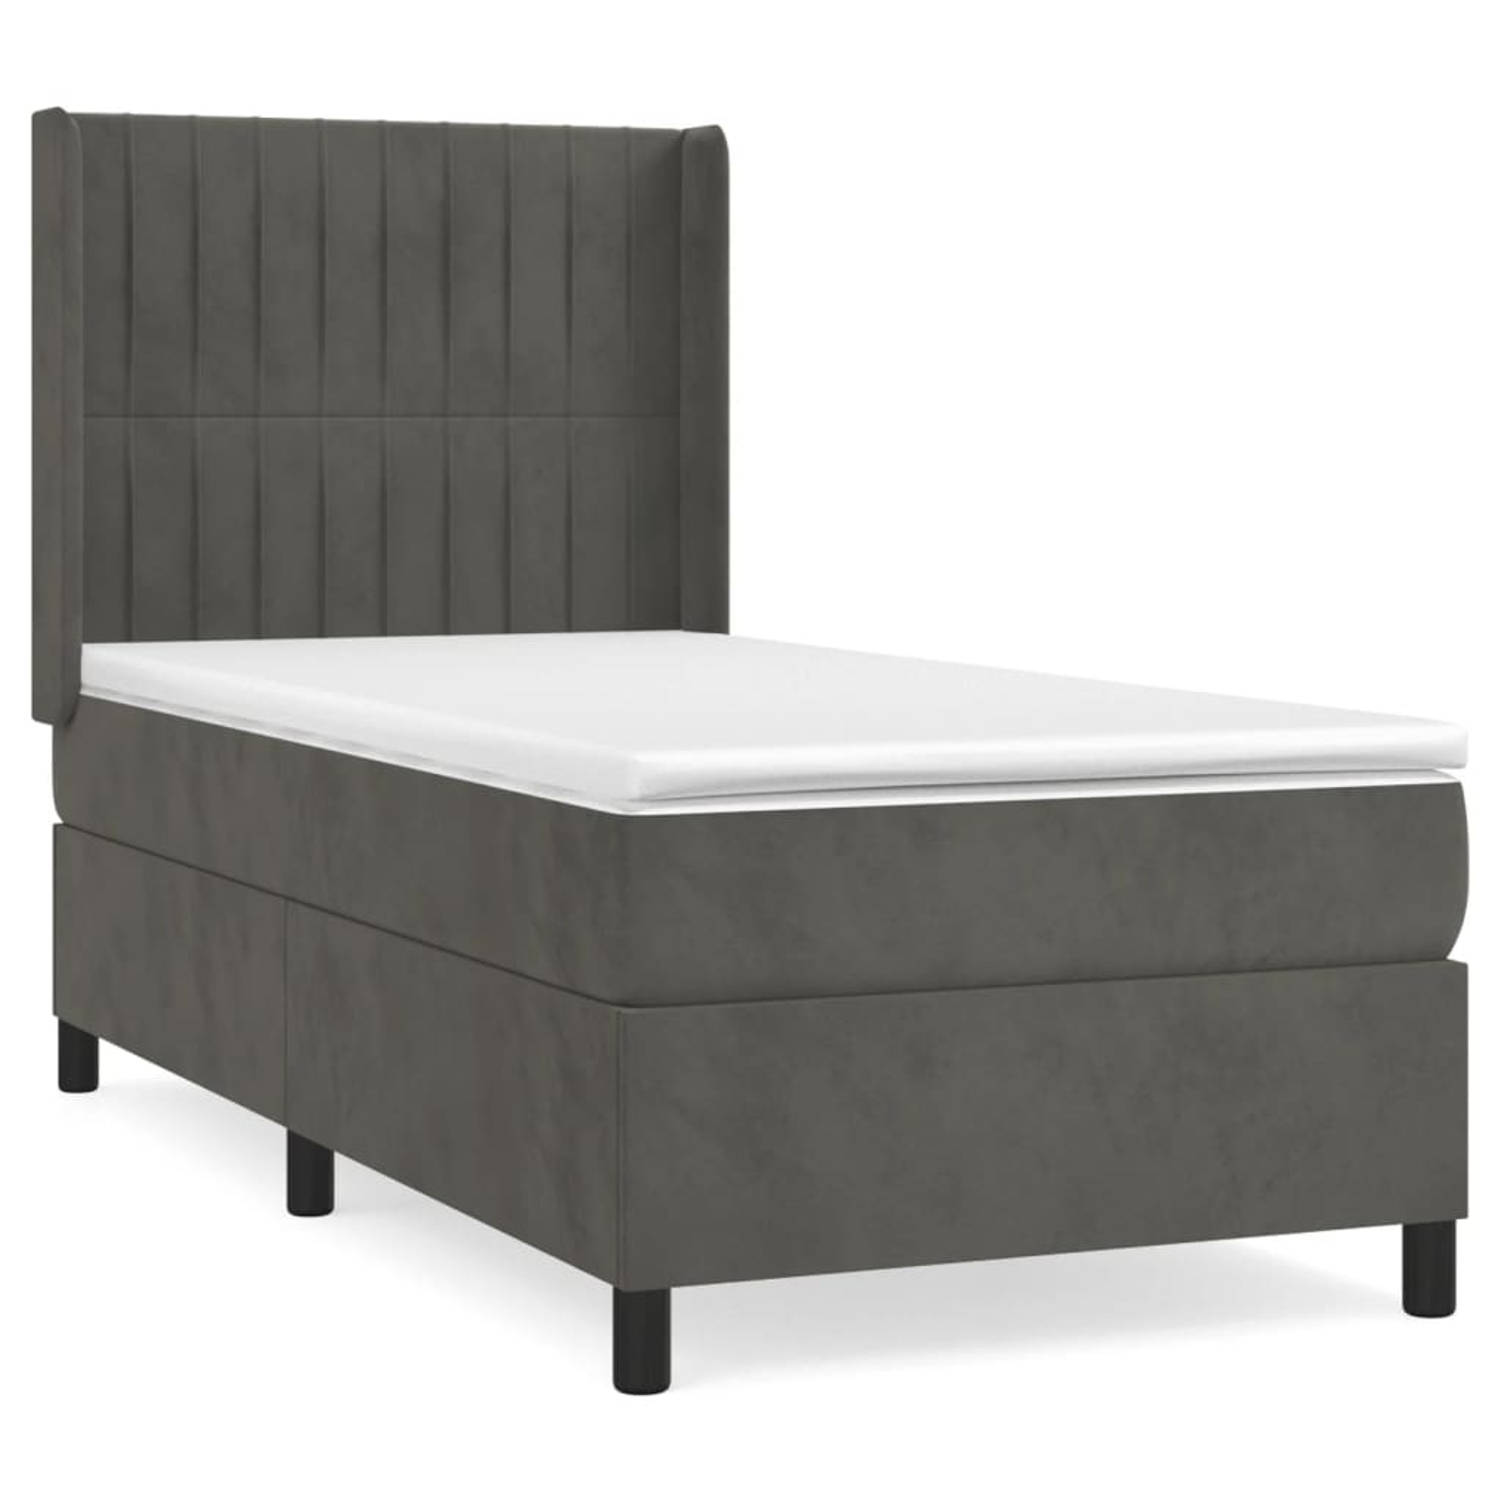 The Living Store Boxspringbed - fluweel - 193x93x118/128 cm - donkergrijs